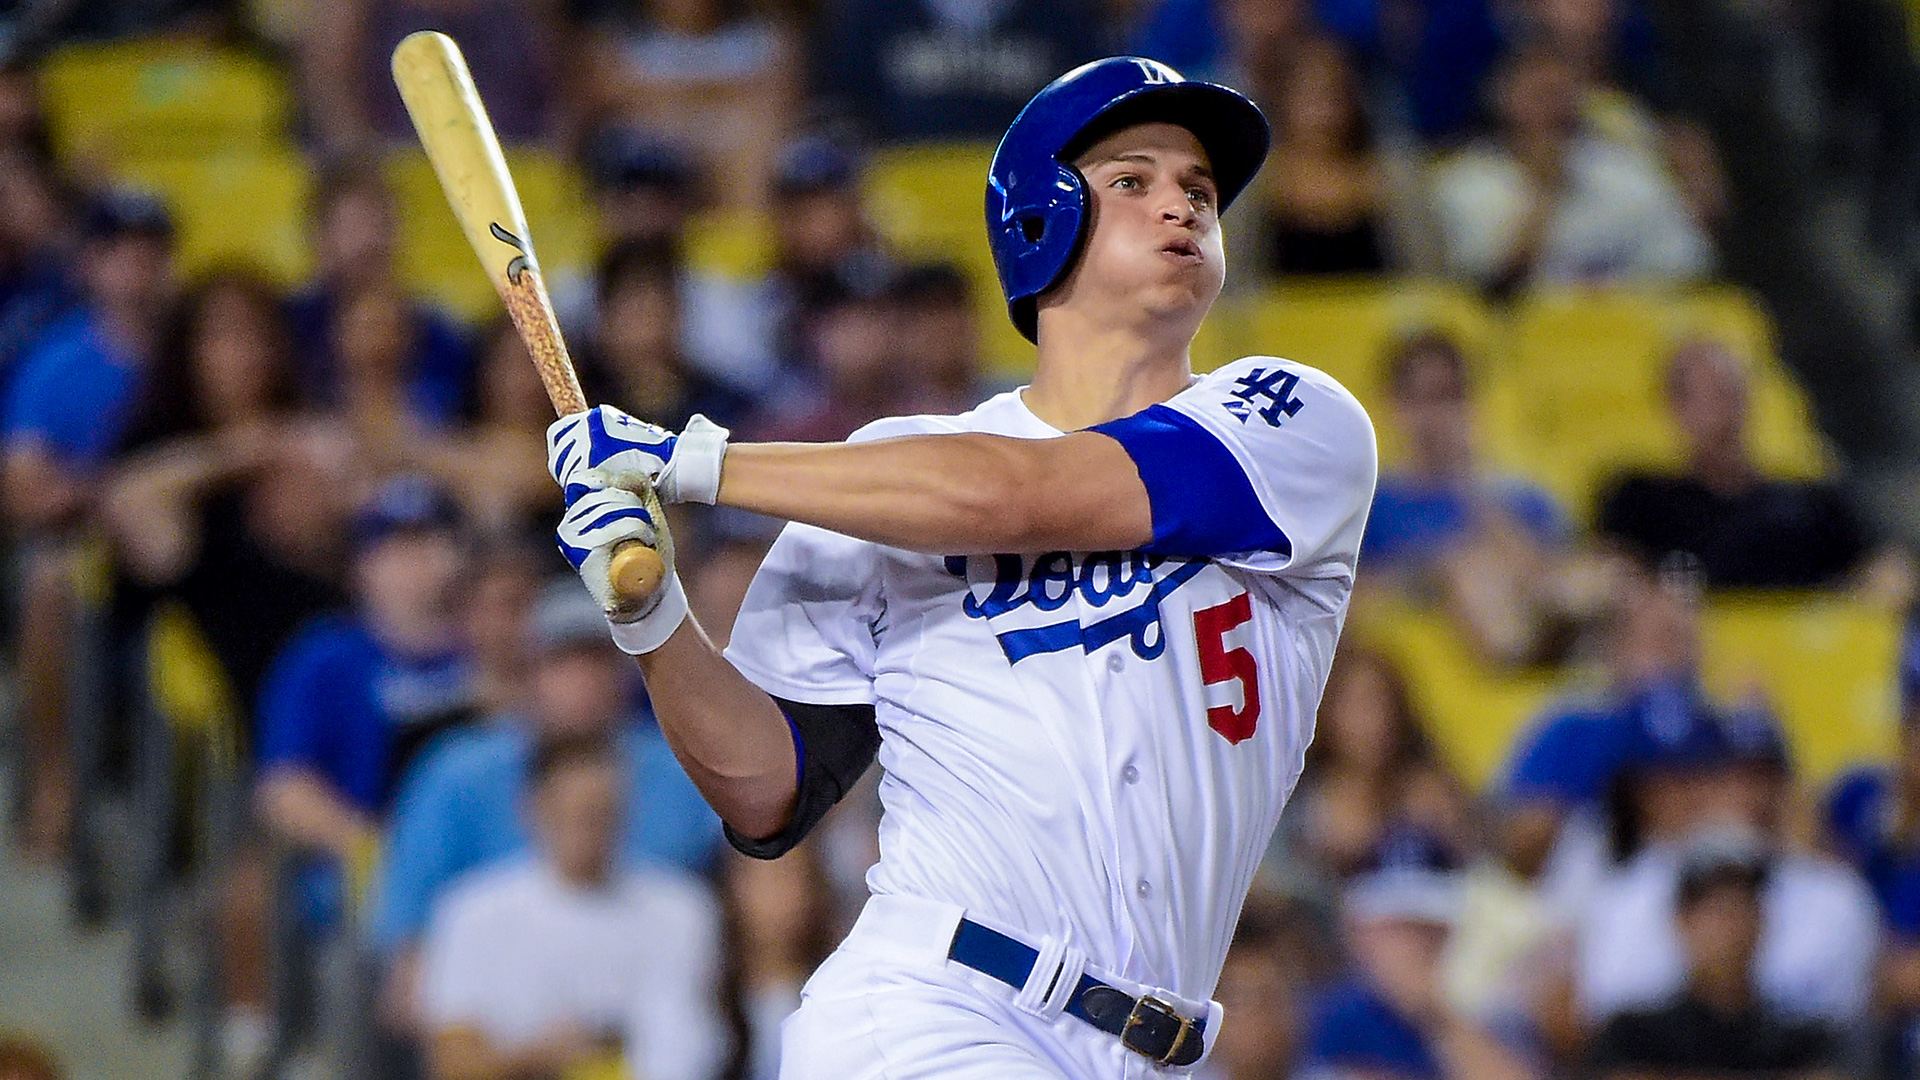 MLB Awards: Corey Seager, Michael Fulmer Named Rookies Of The Year